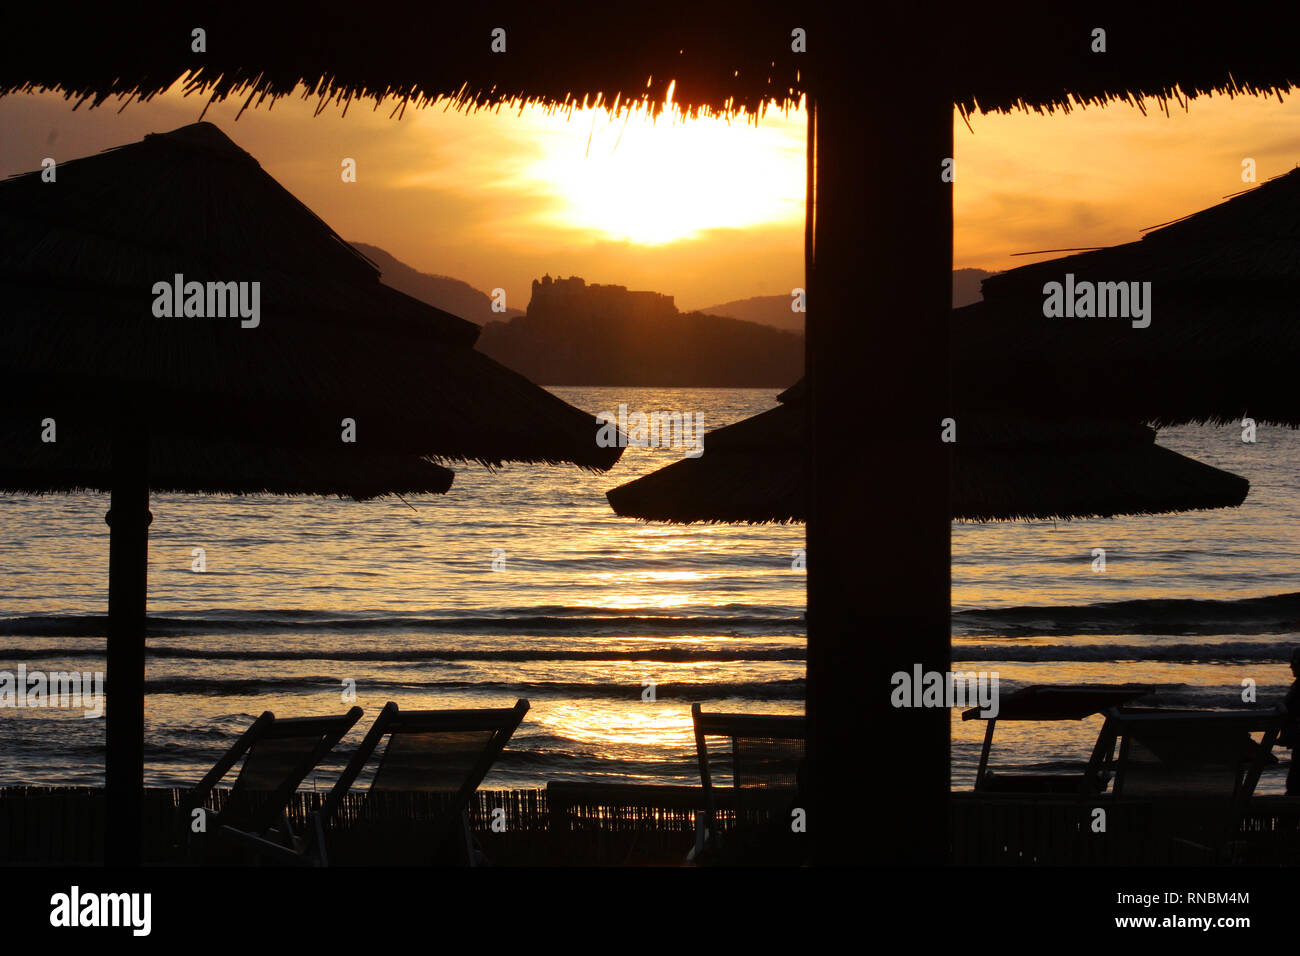 A sunset on the beach with Procida island view Stock Photo